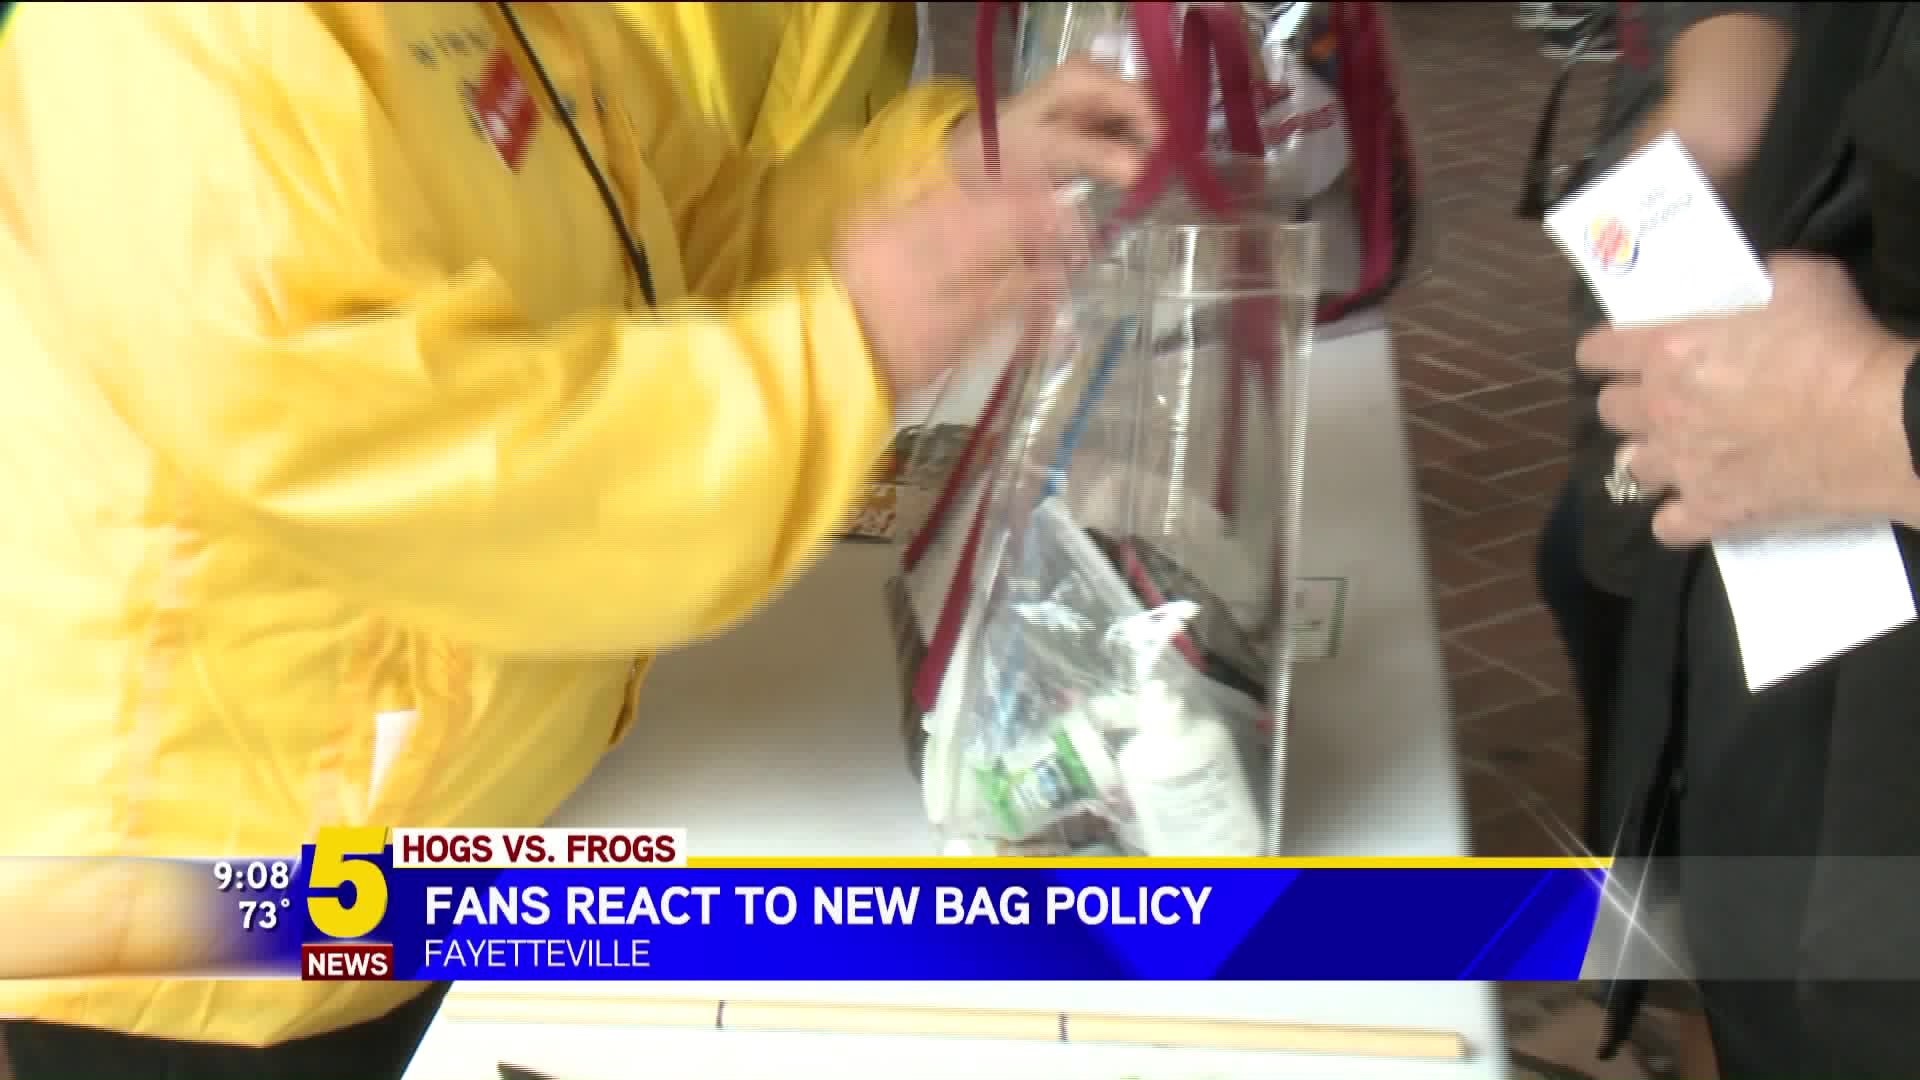 Fans React To New Bag Policy